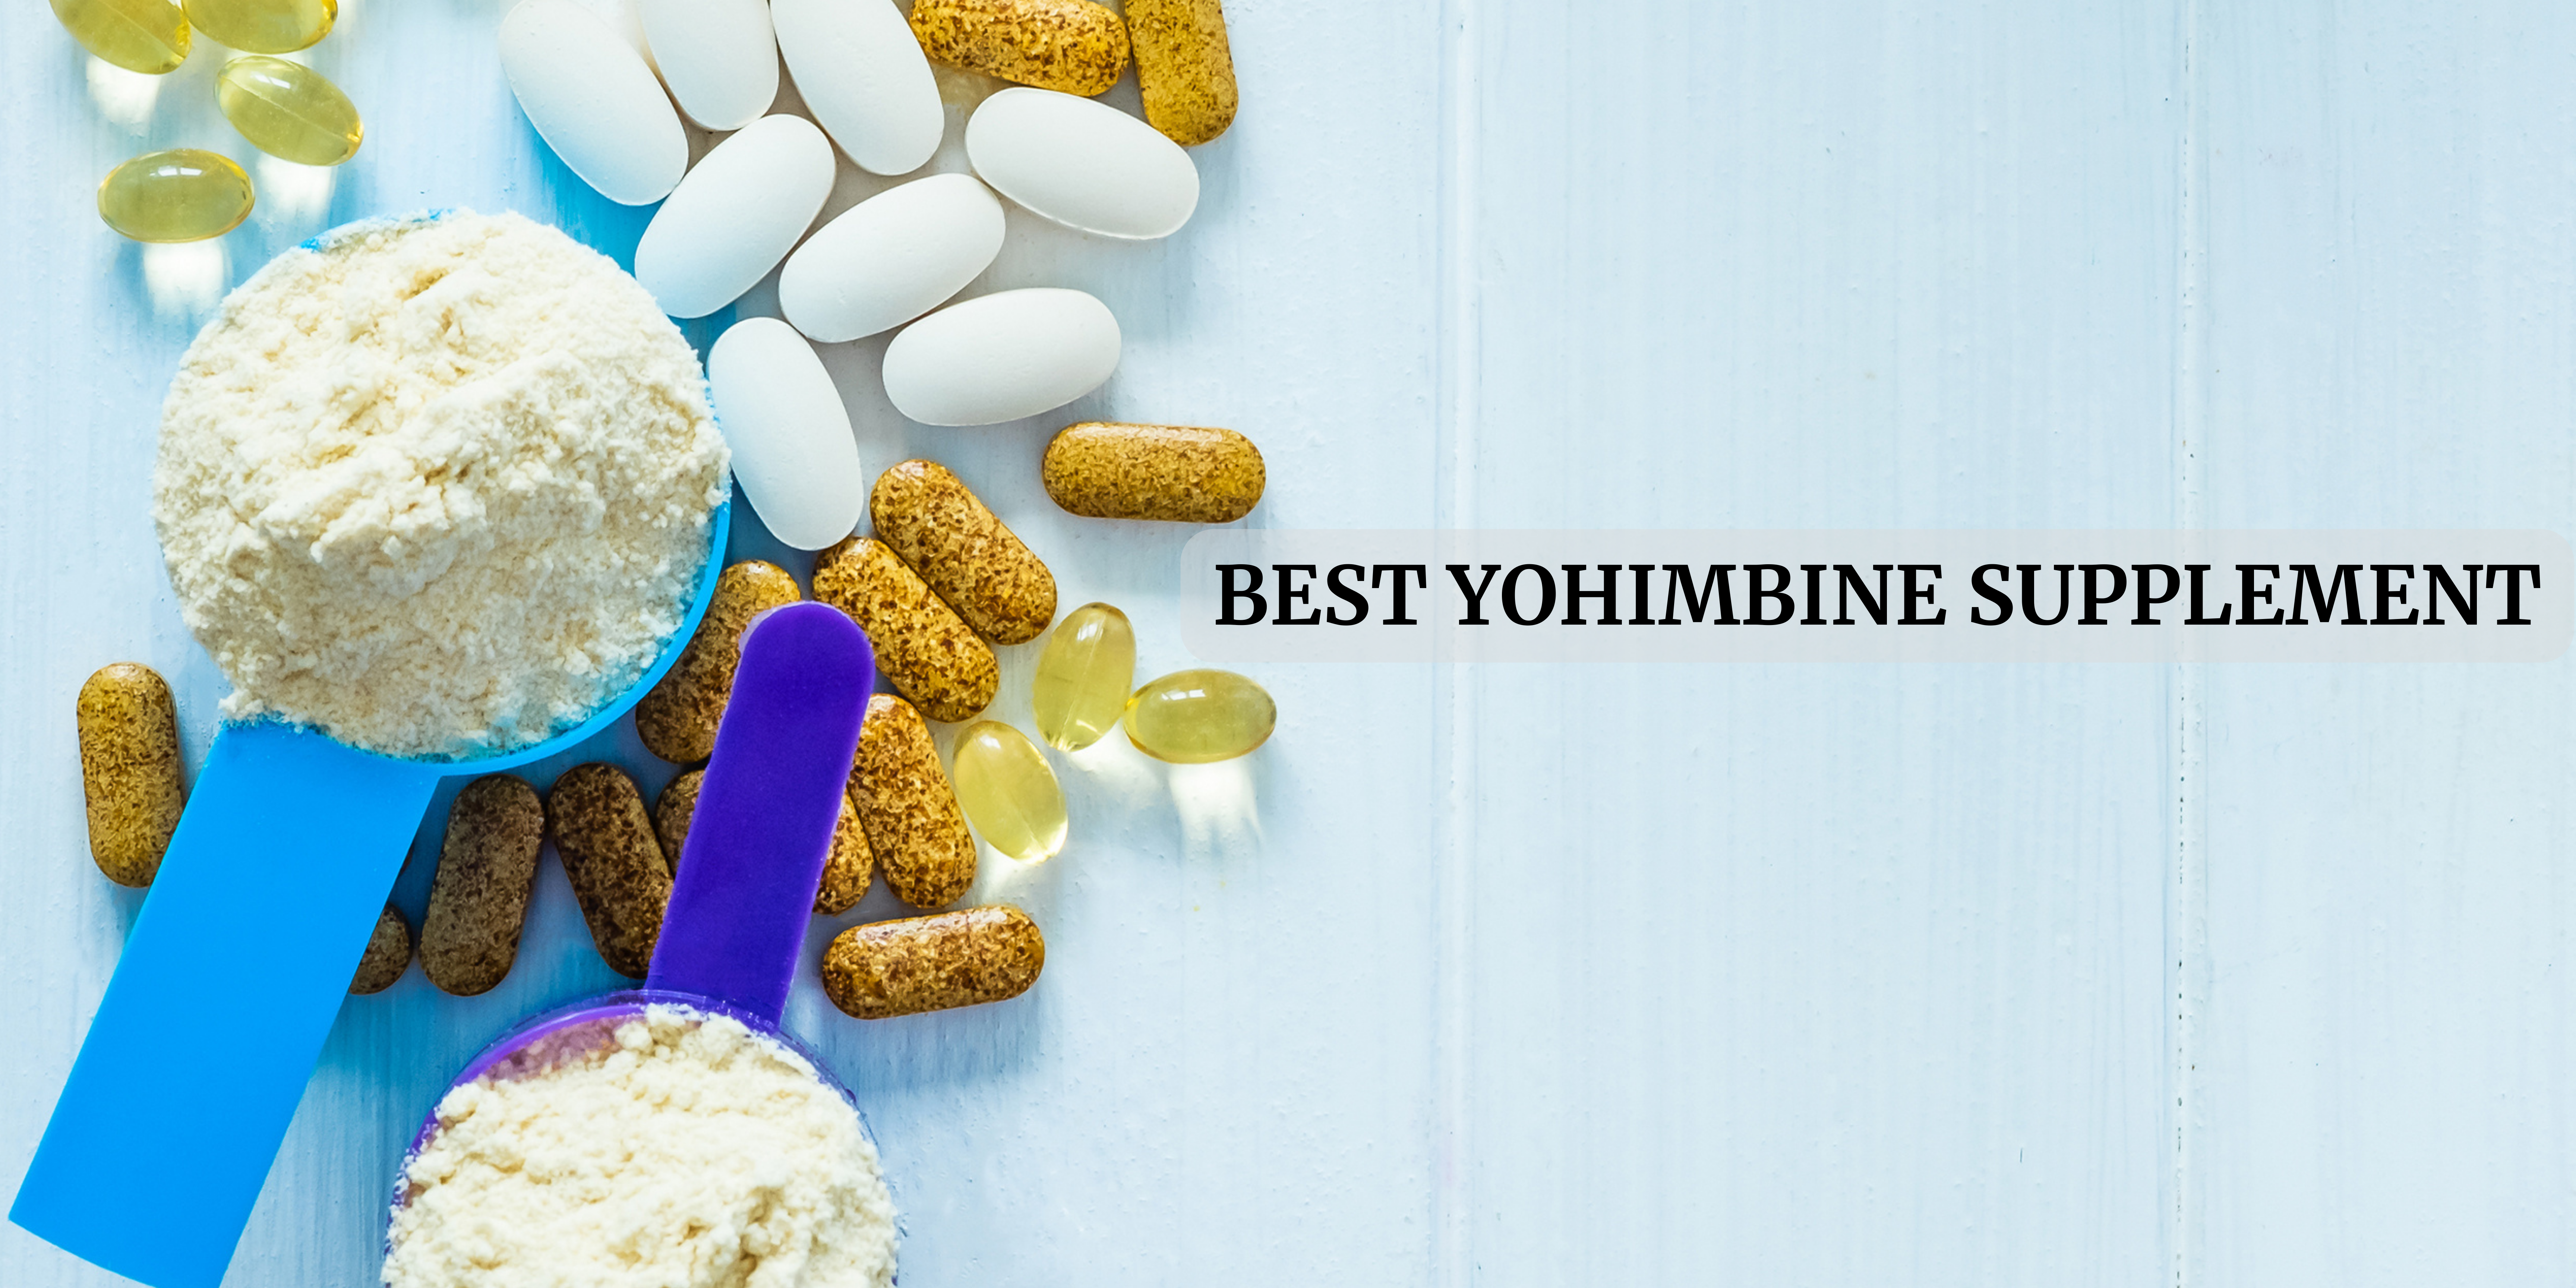 Yohimbine Supplement in France